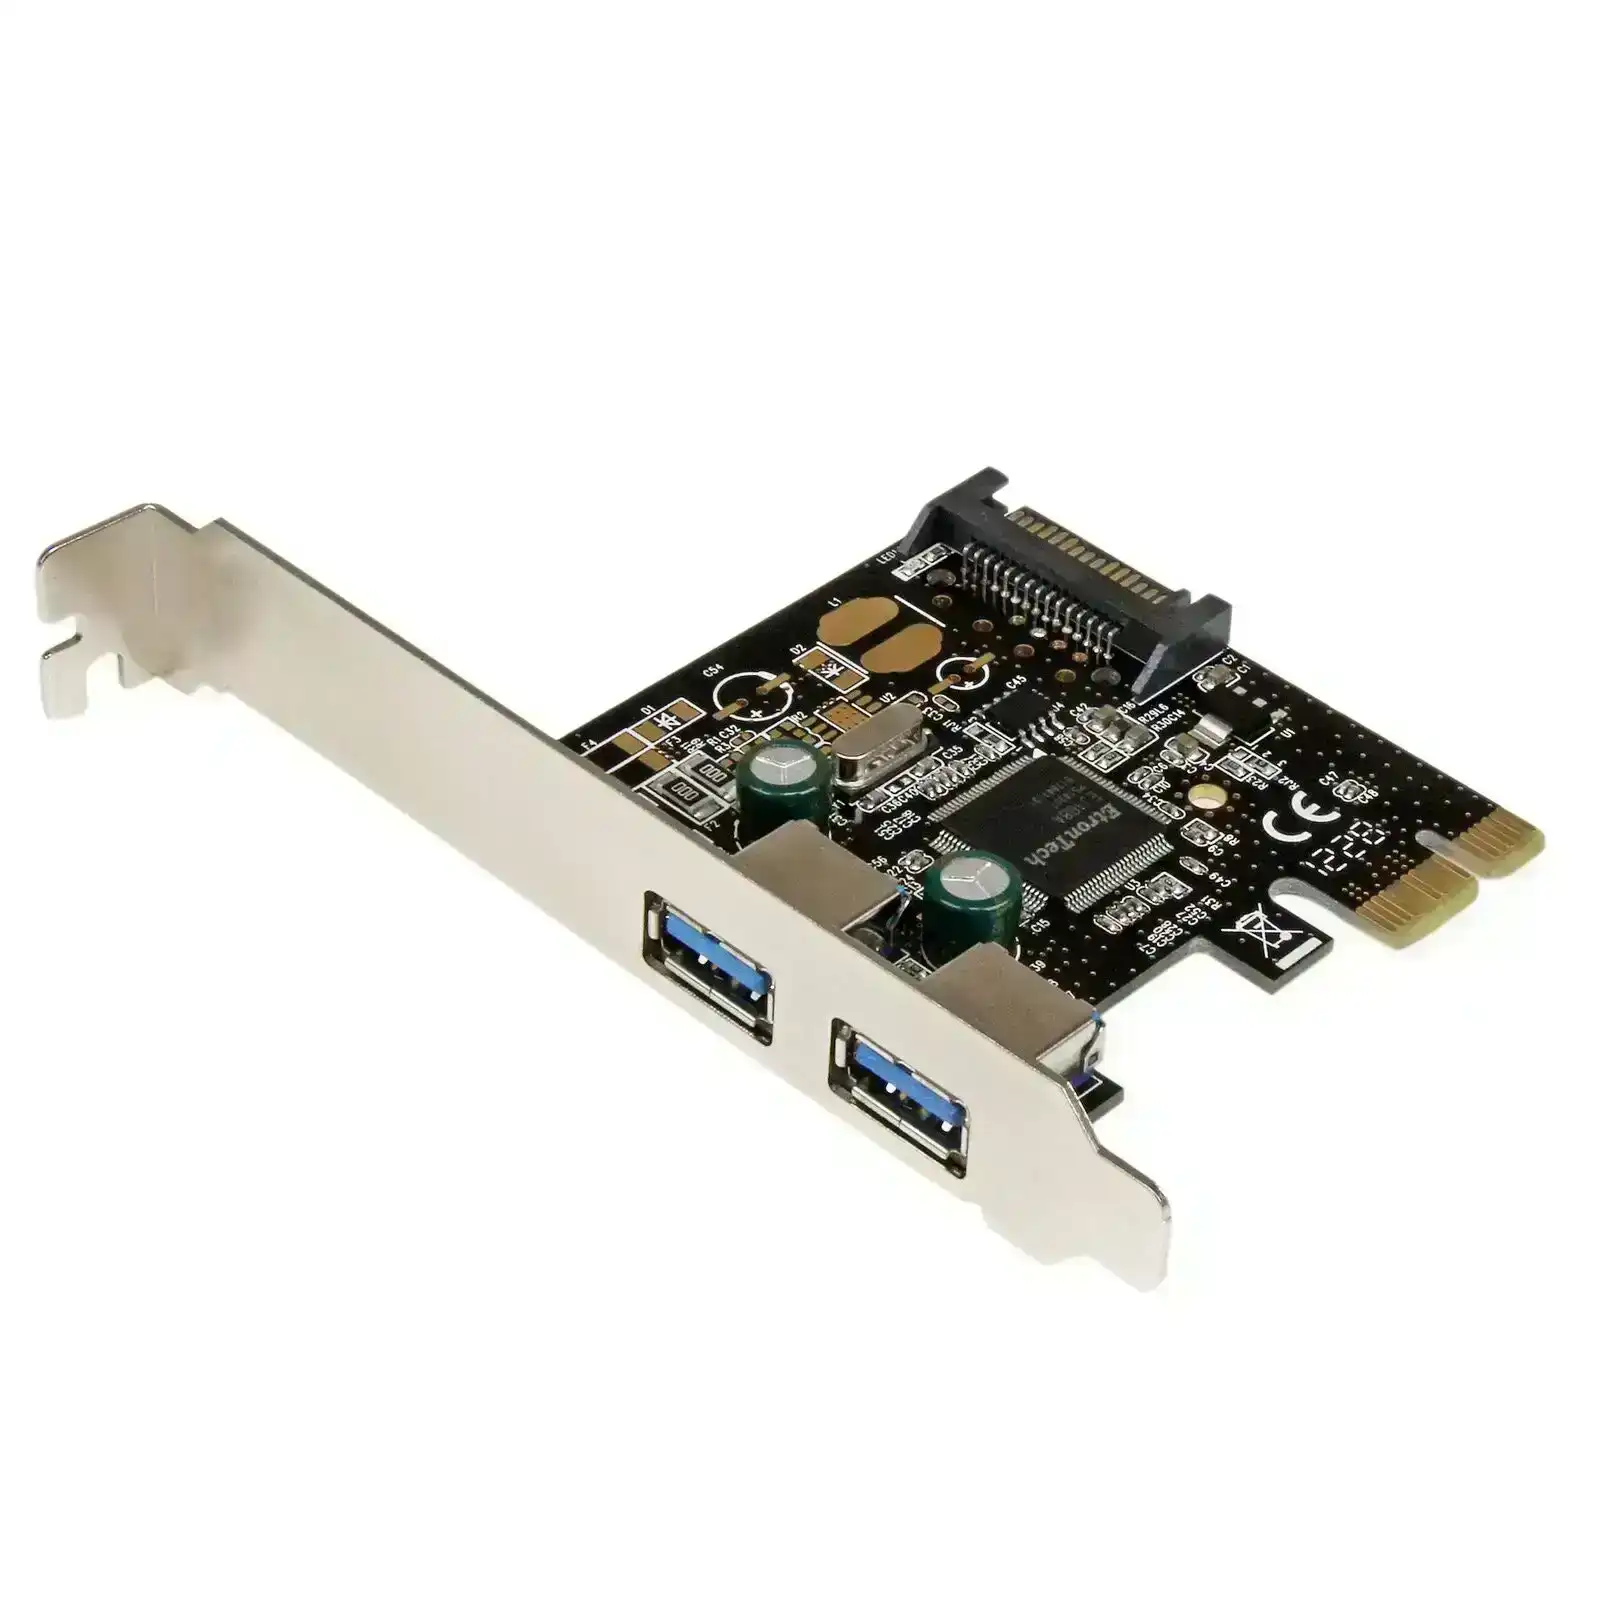 Star Tech 2 Port PCI Express SuperSpeed USB 3.0 Controller/Adapter Card for PC